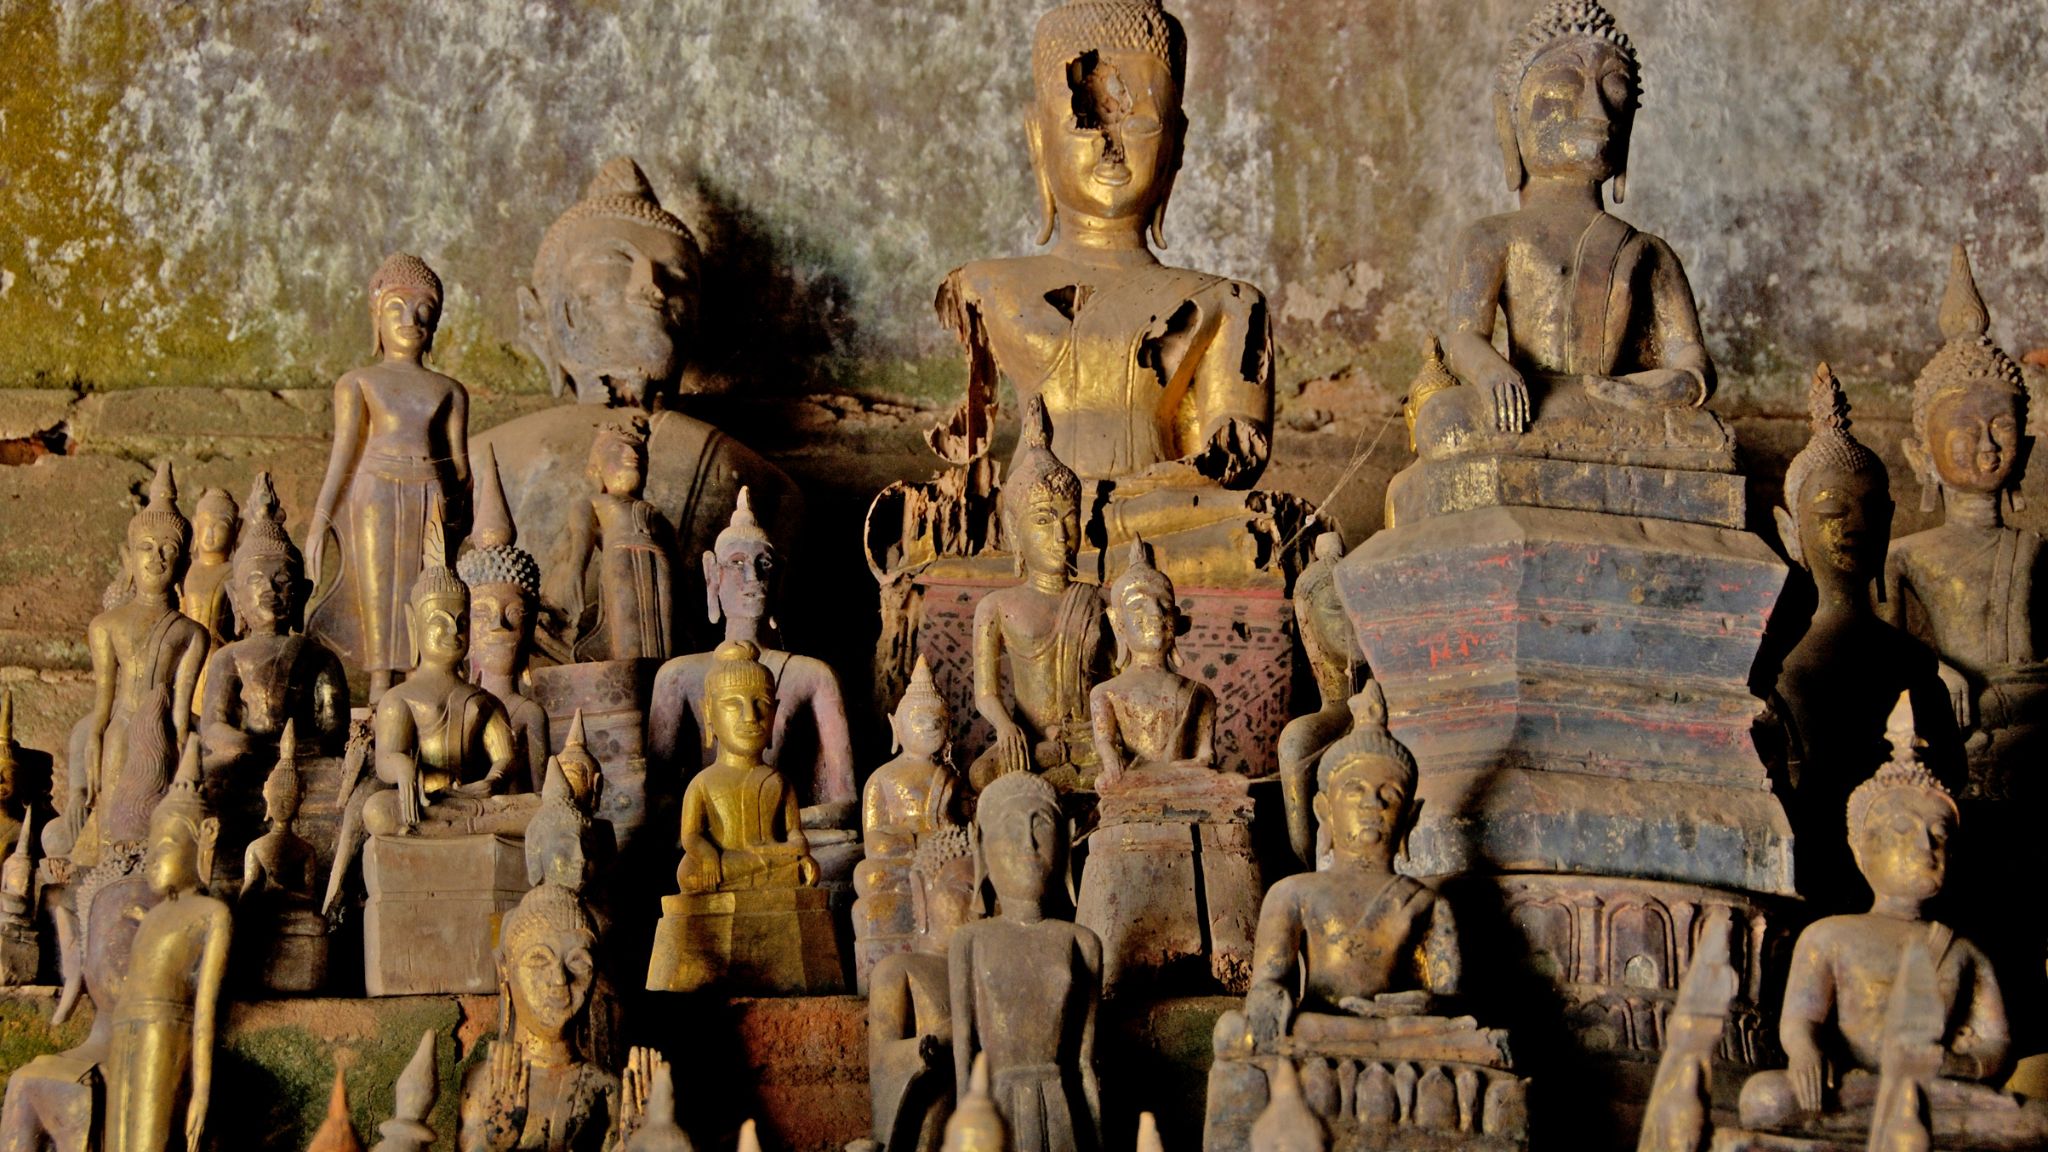 Day 2 Admire Thousands Of Incredible Carved Statues In Pak Ou Caves